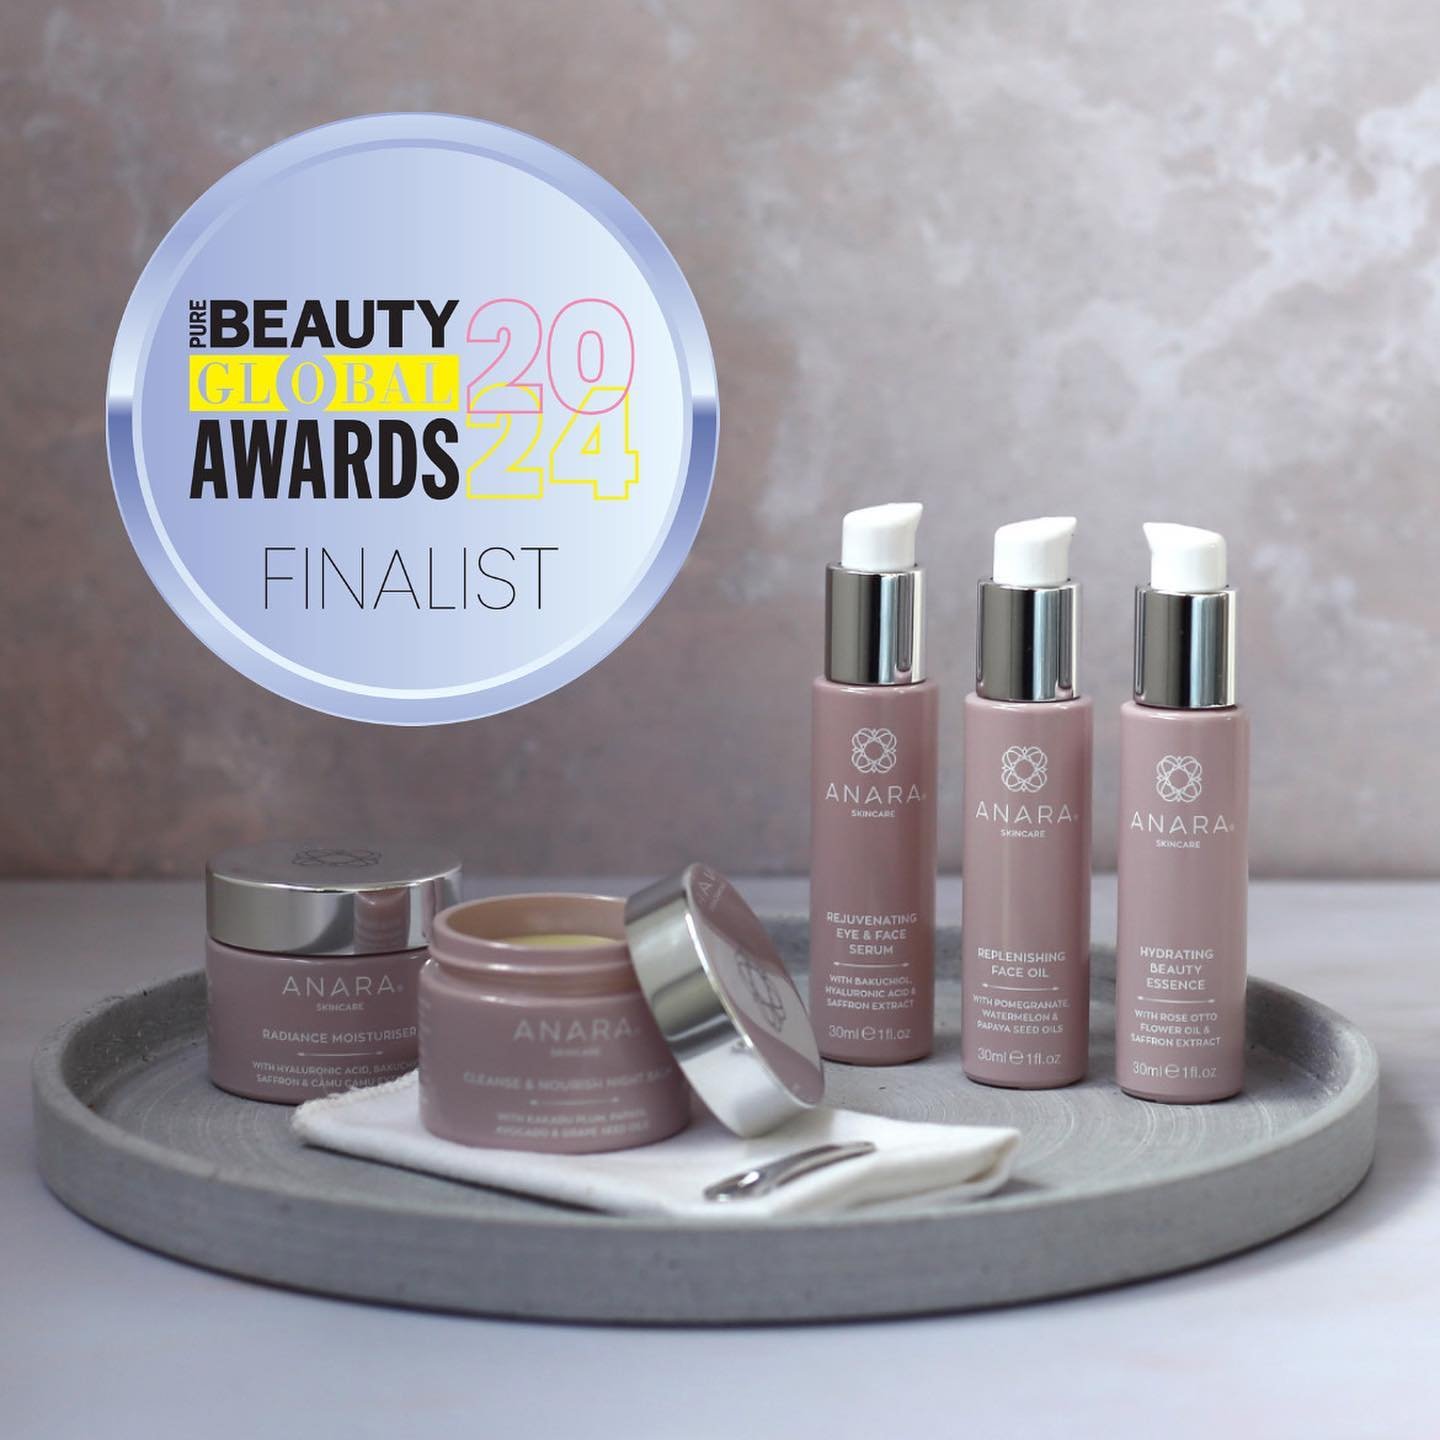 We&rsquo;re so proud to announce that @anara.skincare is a finalist in 3 categories for the @purebeautymagazine global awards this year ~ Best Moisturiser, Best Serum and Best New Indie Beauty Brand 🩷
The full list of finalists can be found in today